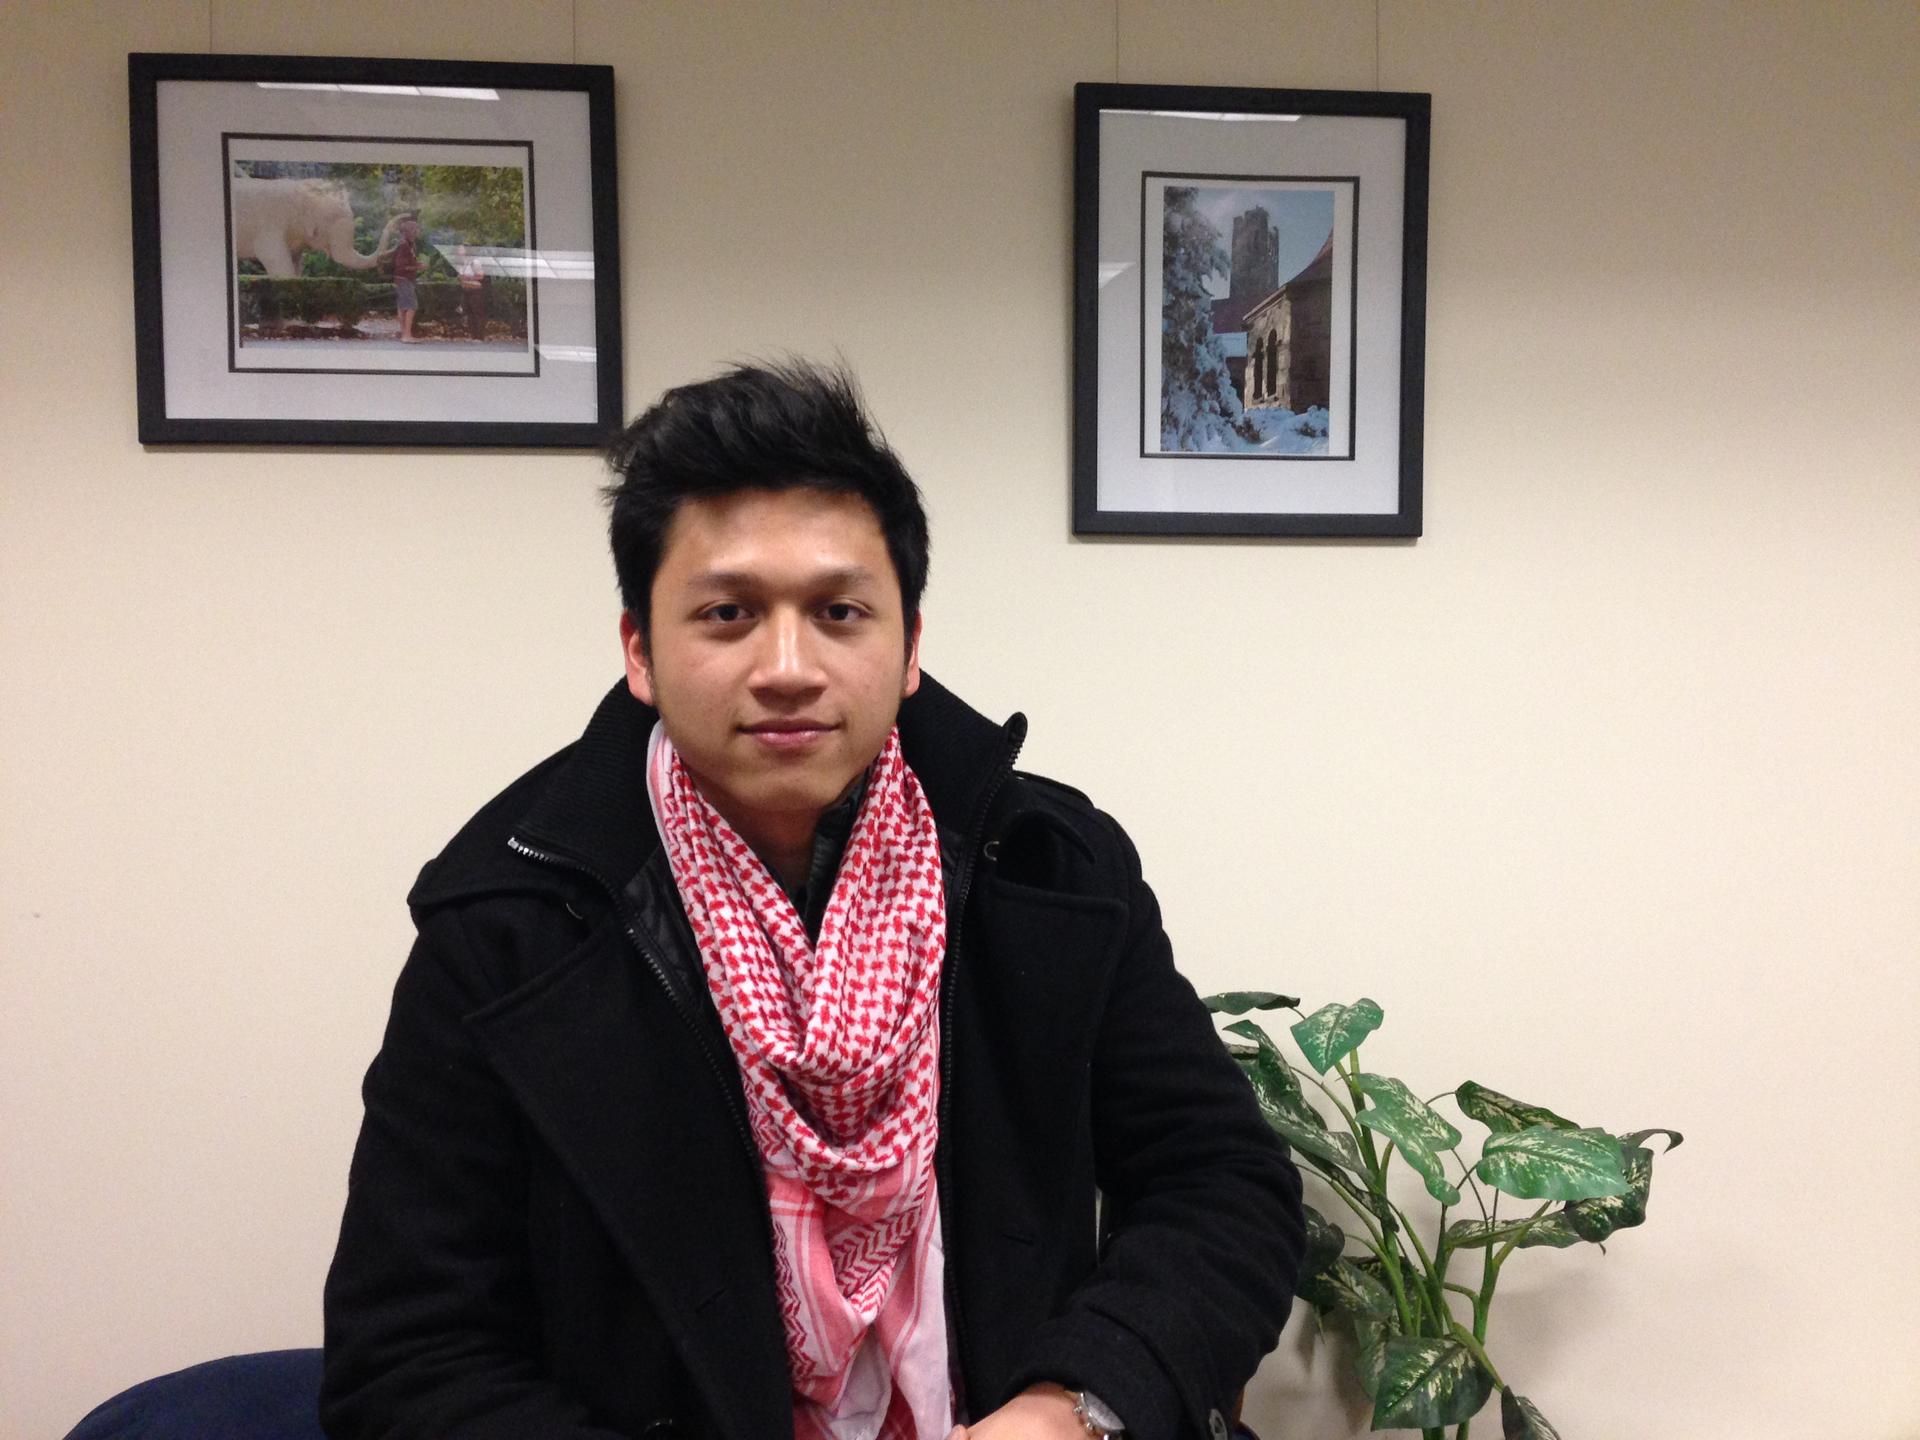 Andra Gusman is a Muslim from Jakarta, Indonesia. He says dating isn't frowned upon in his family. 